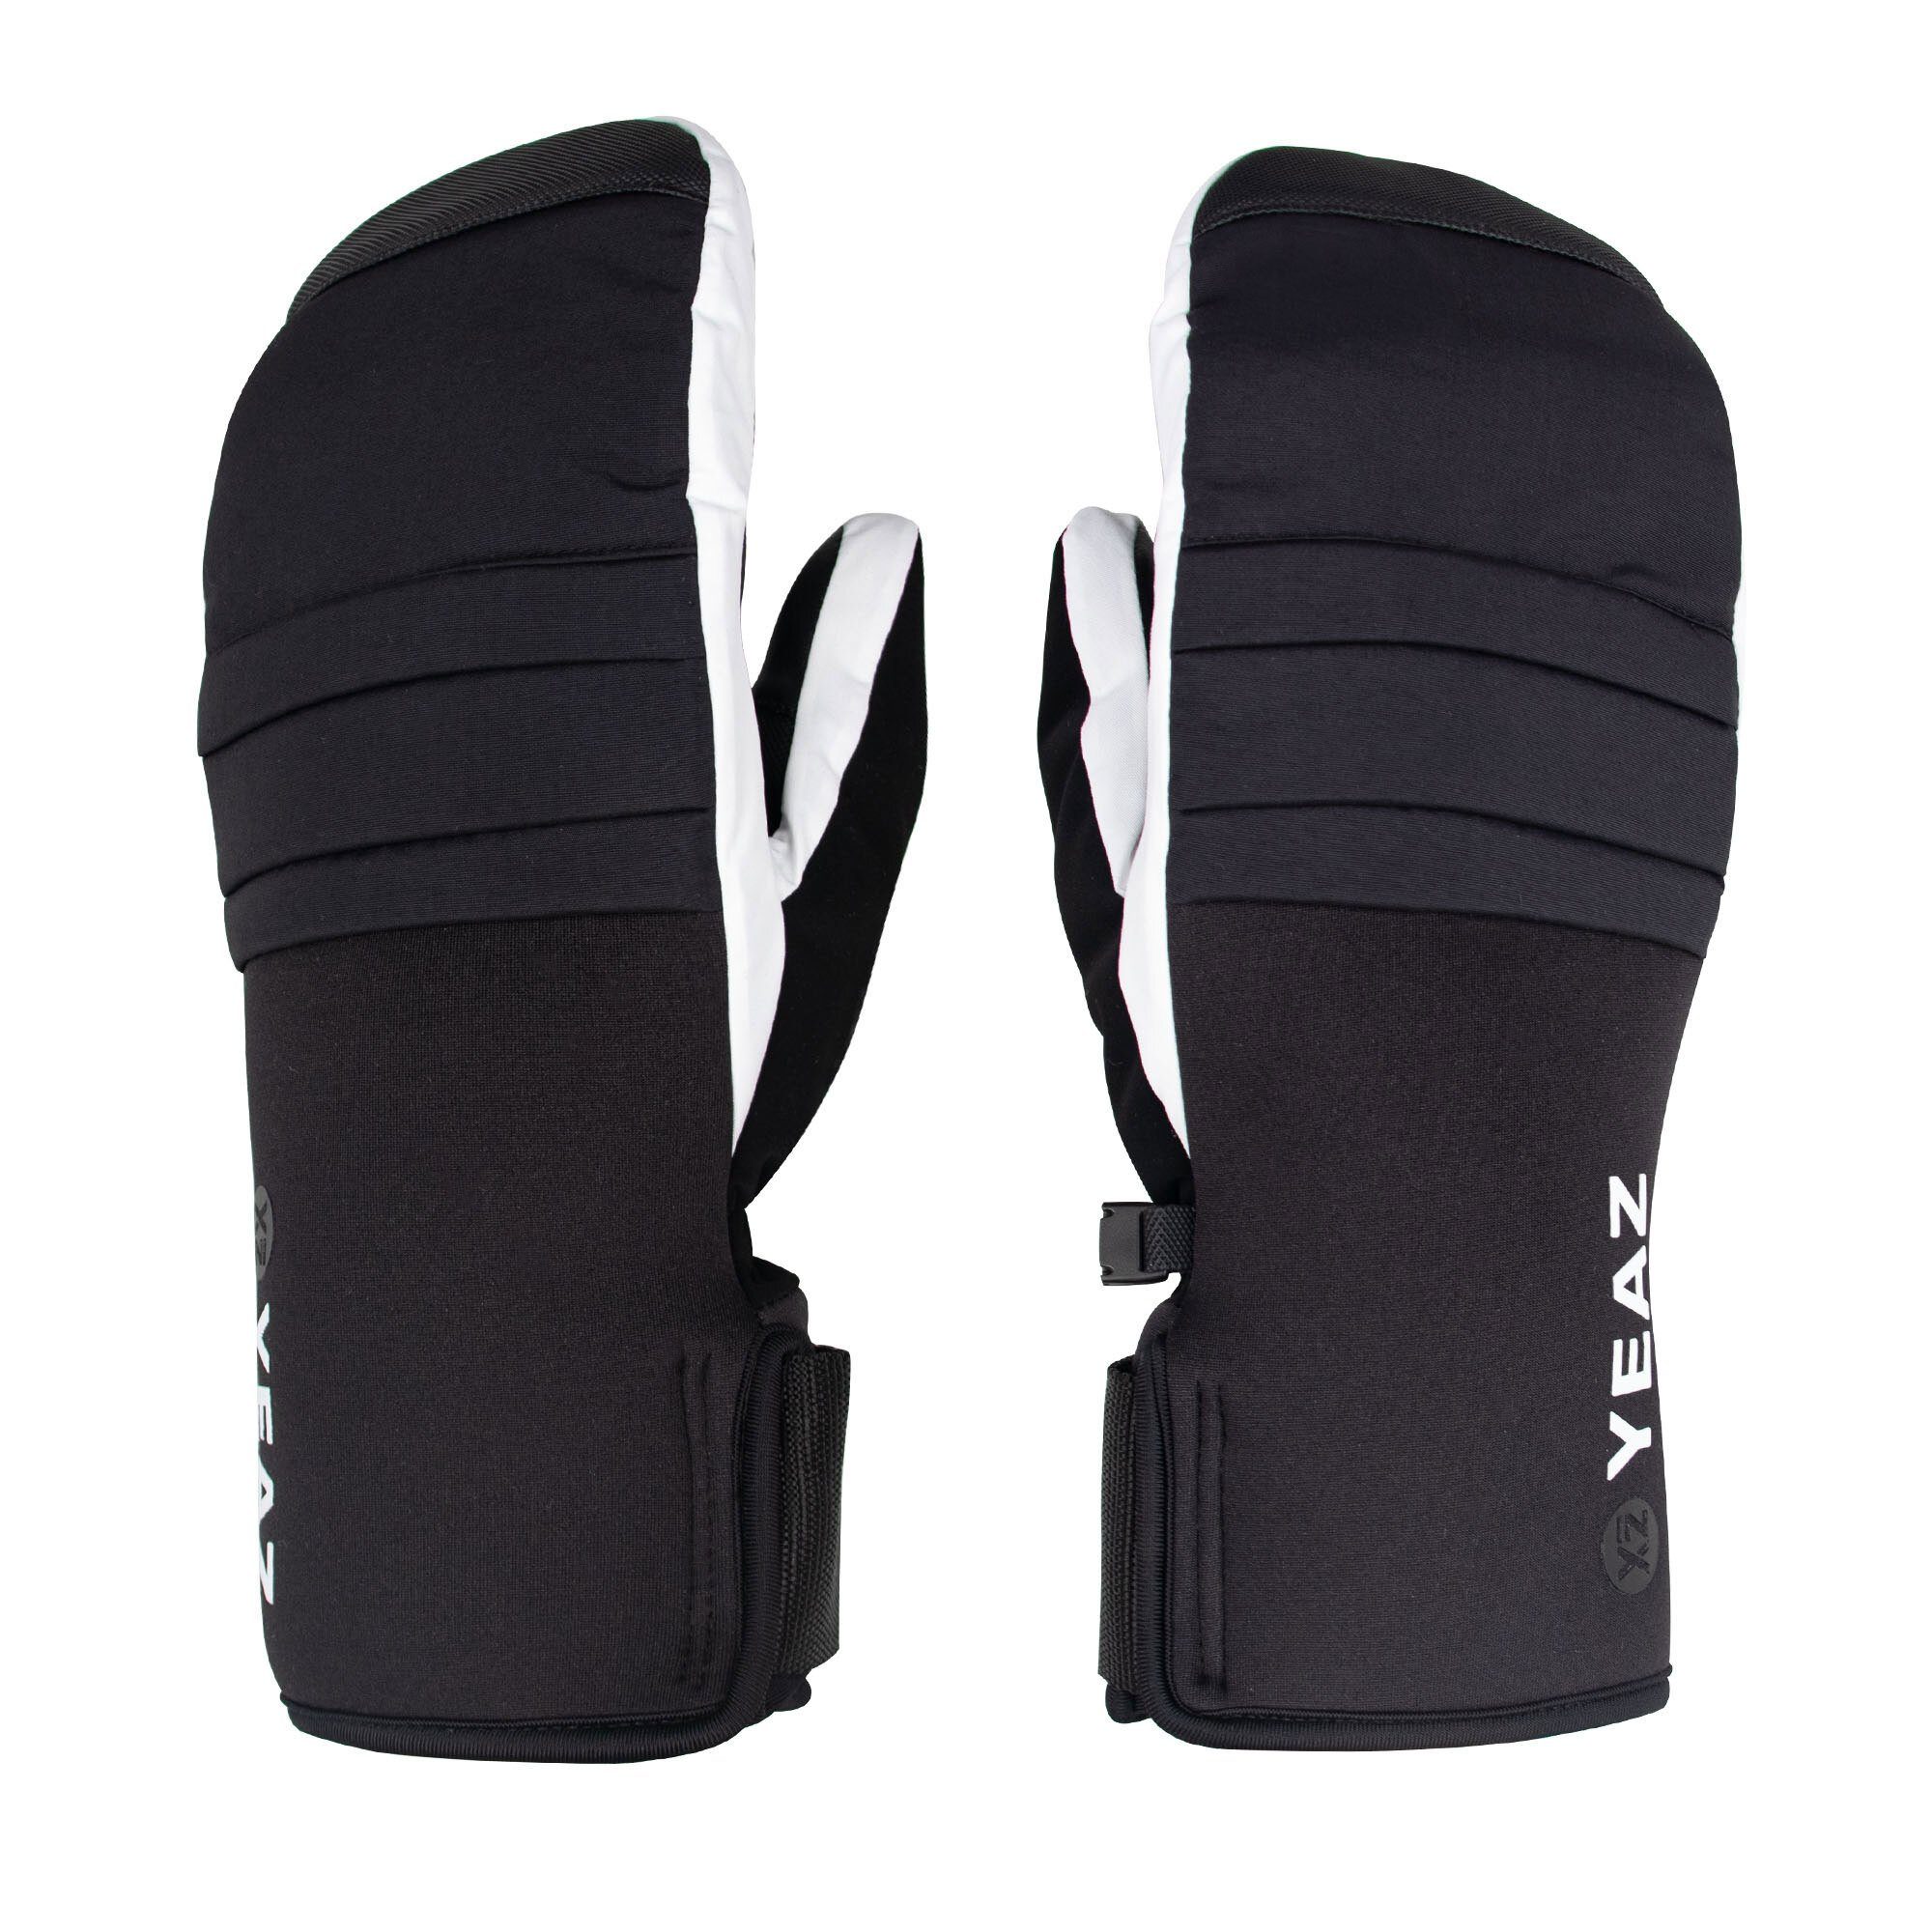 YEAZ Skihandschuhe POW Wrist-Band fausthandschuhe Touch-Funktion &